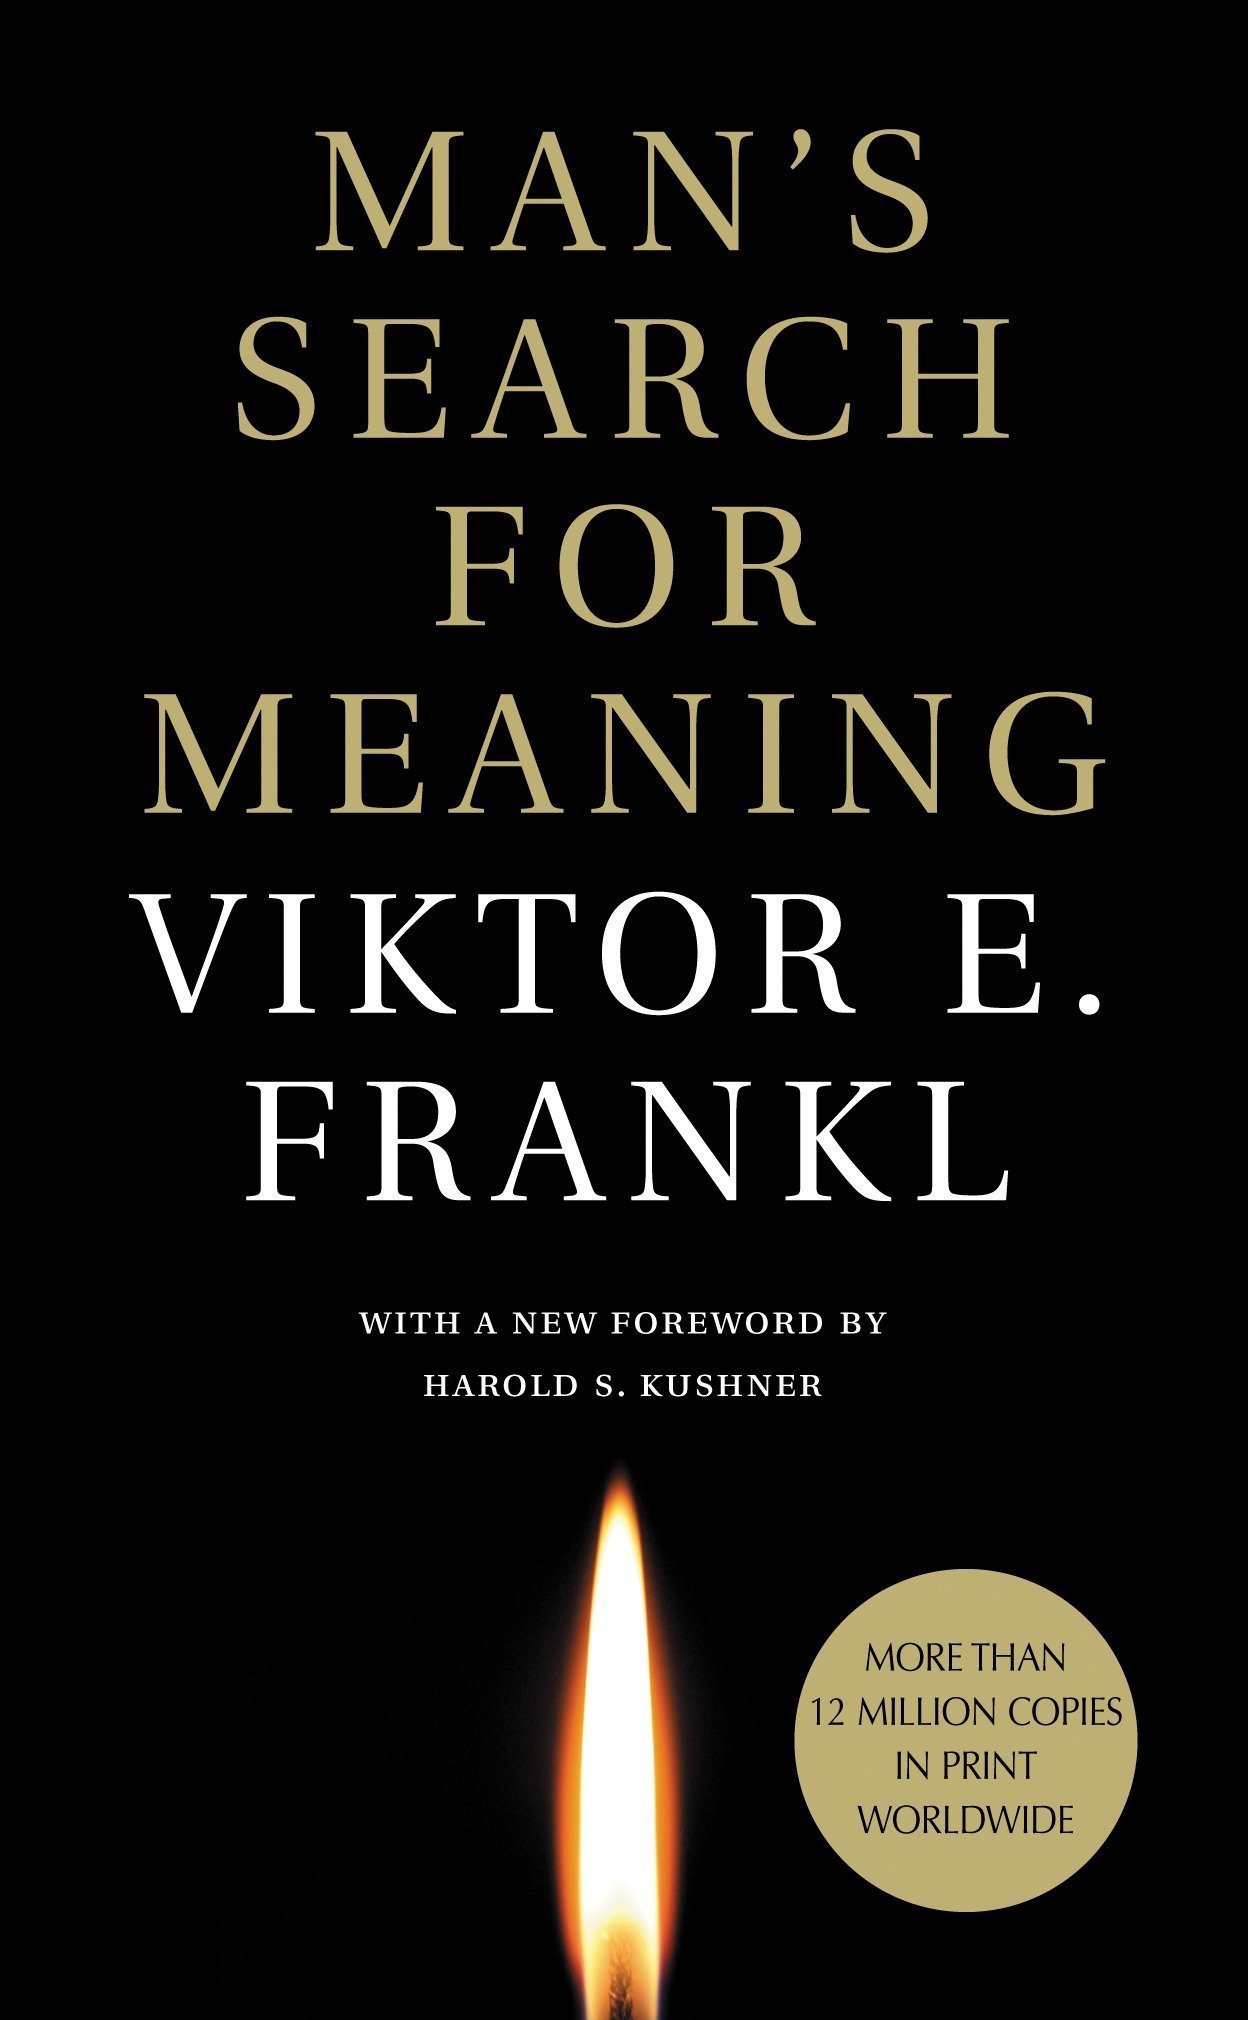 Man's Search for Meaning cover image.